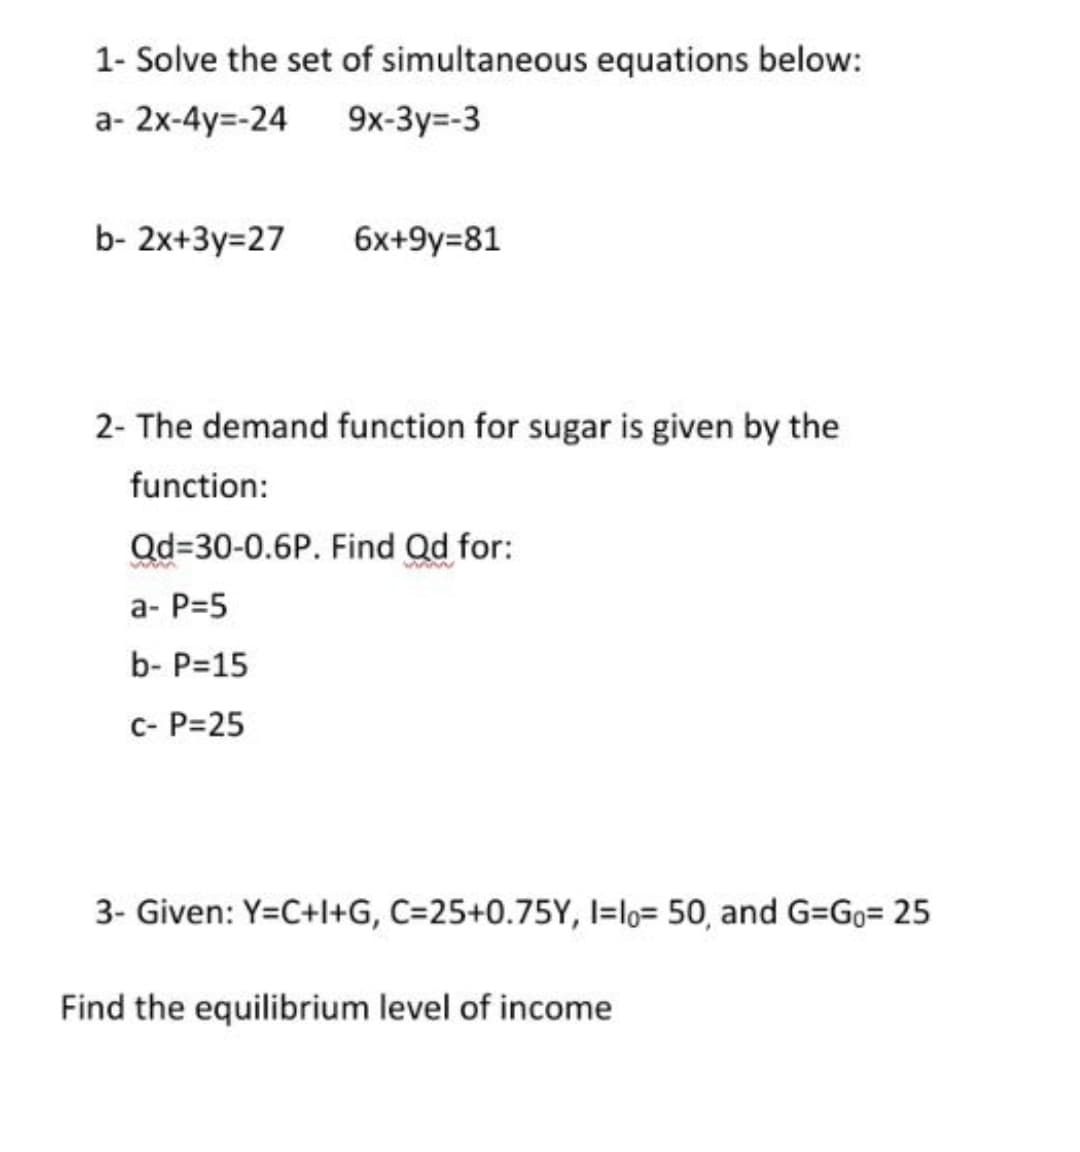 1- Solve the set of simultaneous equations below:
а- 2x-4y--24
9x-3y=-3
b- 2x+3y=27
6x+9y=81
2- The demand function for sugar is given by the
function:
Qd=30-0.6P. Find Qd for:
a- P=5
b- P=15
c- P=25
3- Given: Y=C+l+G, C=25+0.75Y, I=lo= 50, and G=Go= 25
Find the equilibrium level of income
